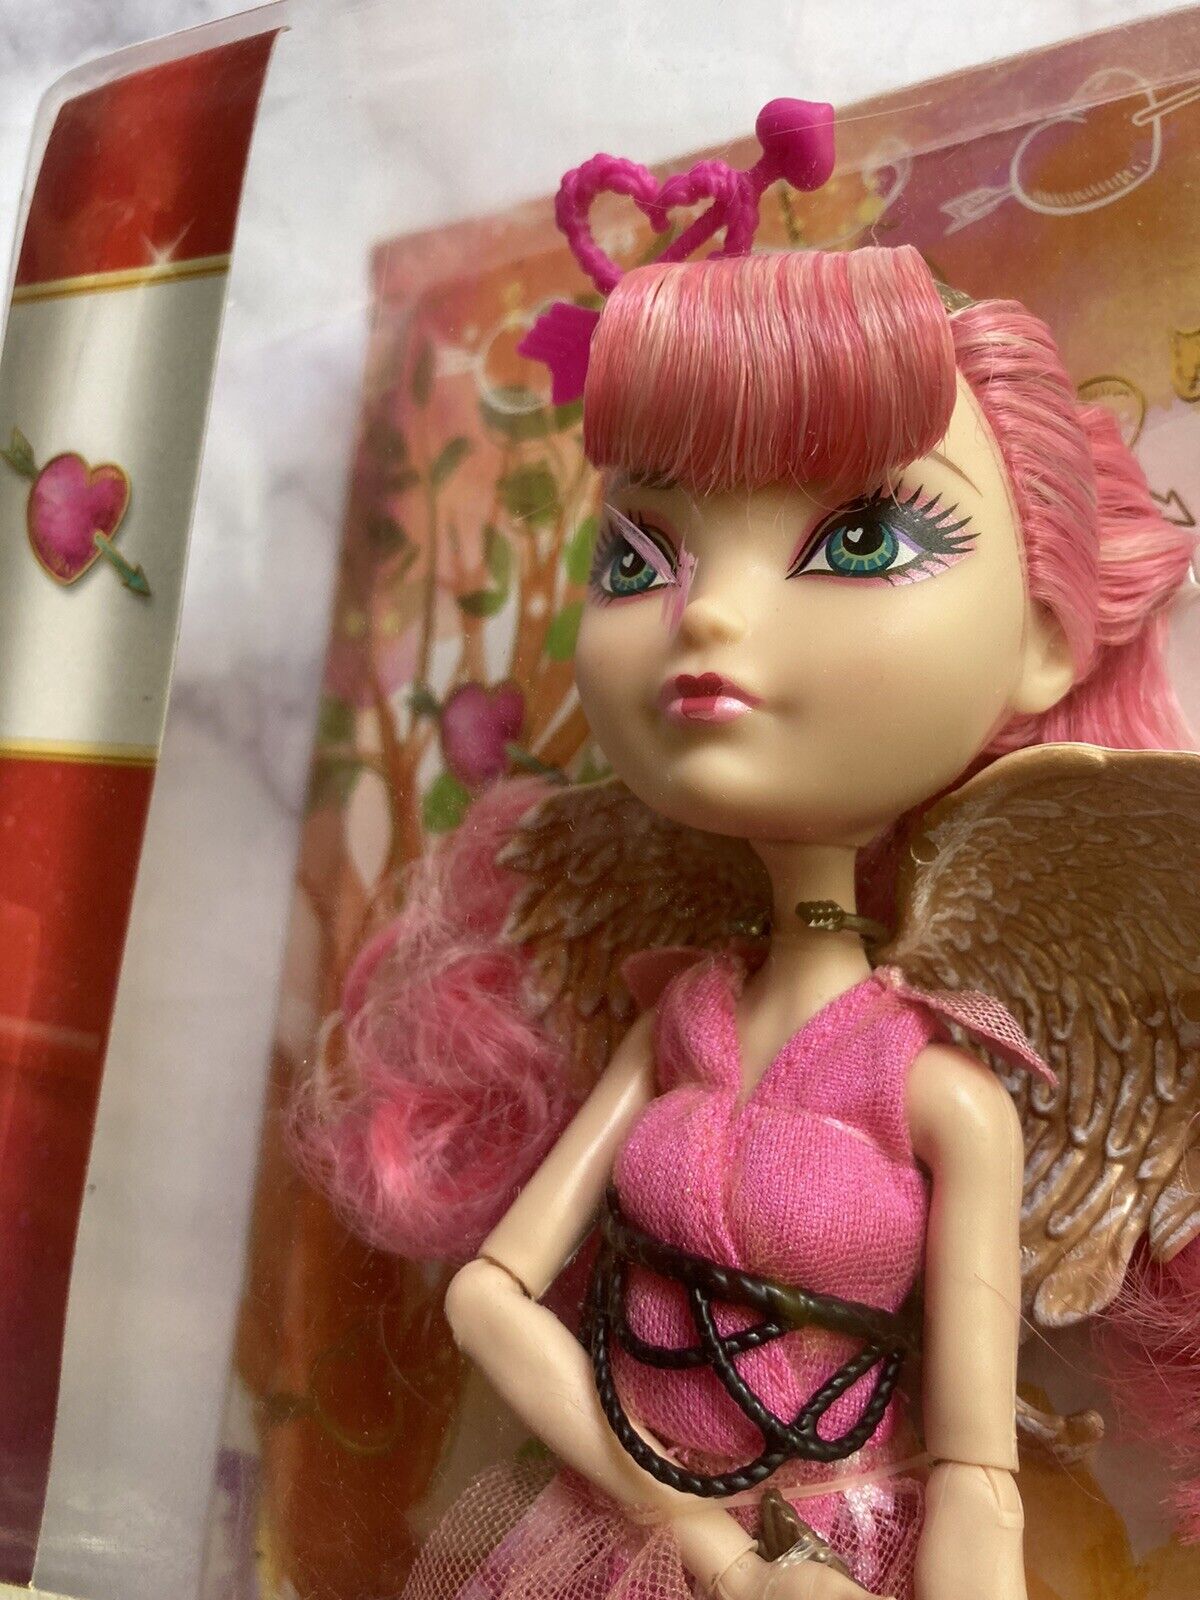 From “Monster High” to “Fairytale Princess”: The Story of Ever After High Dolls插图